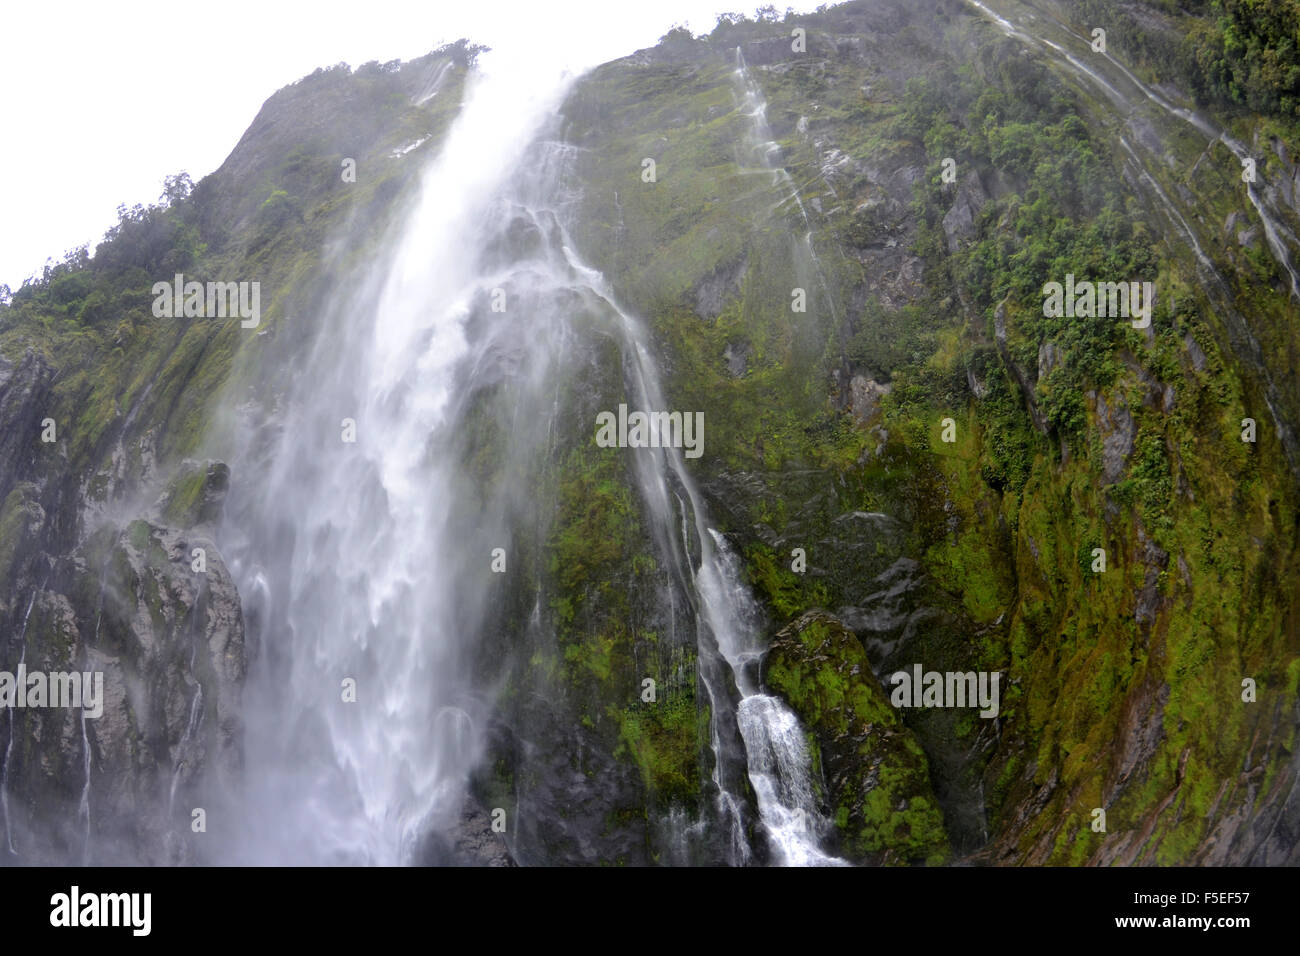 Stirling waterfall, Milford sound, Fiordland National Park, New Zealand Stock Photo